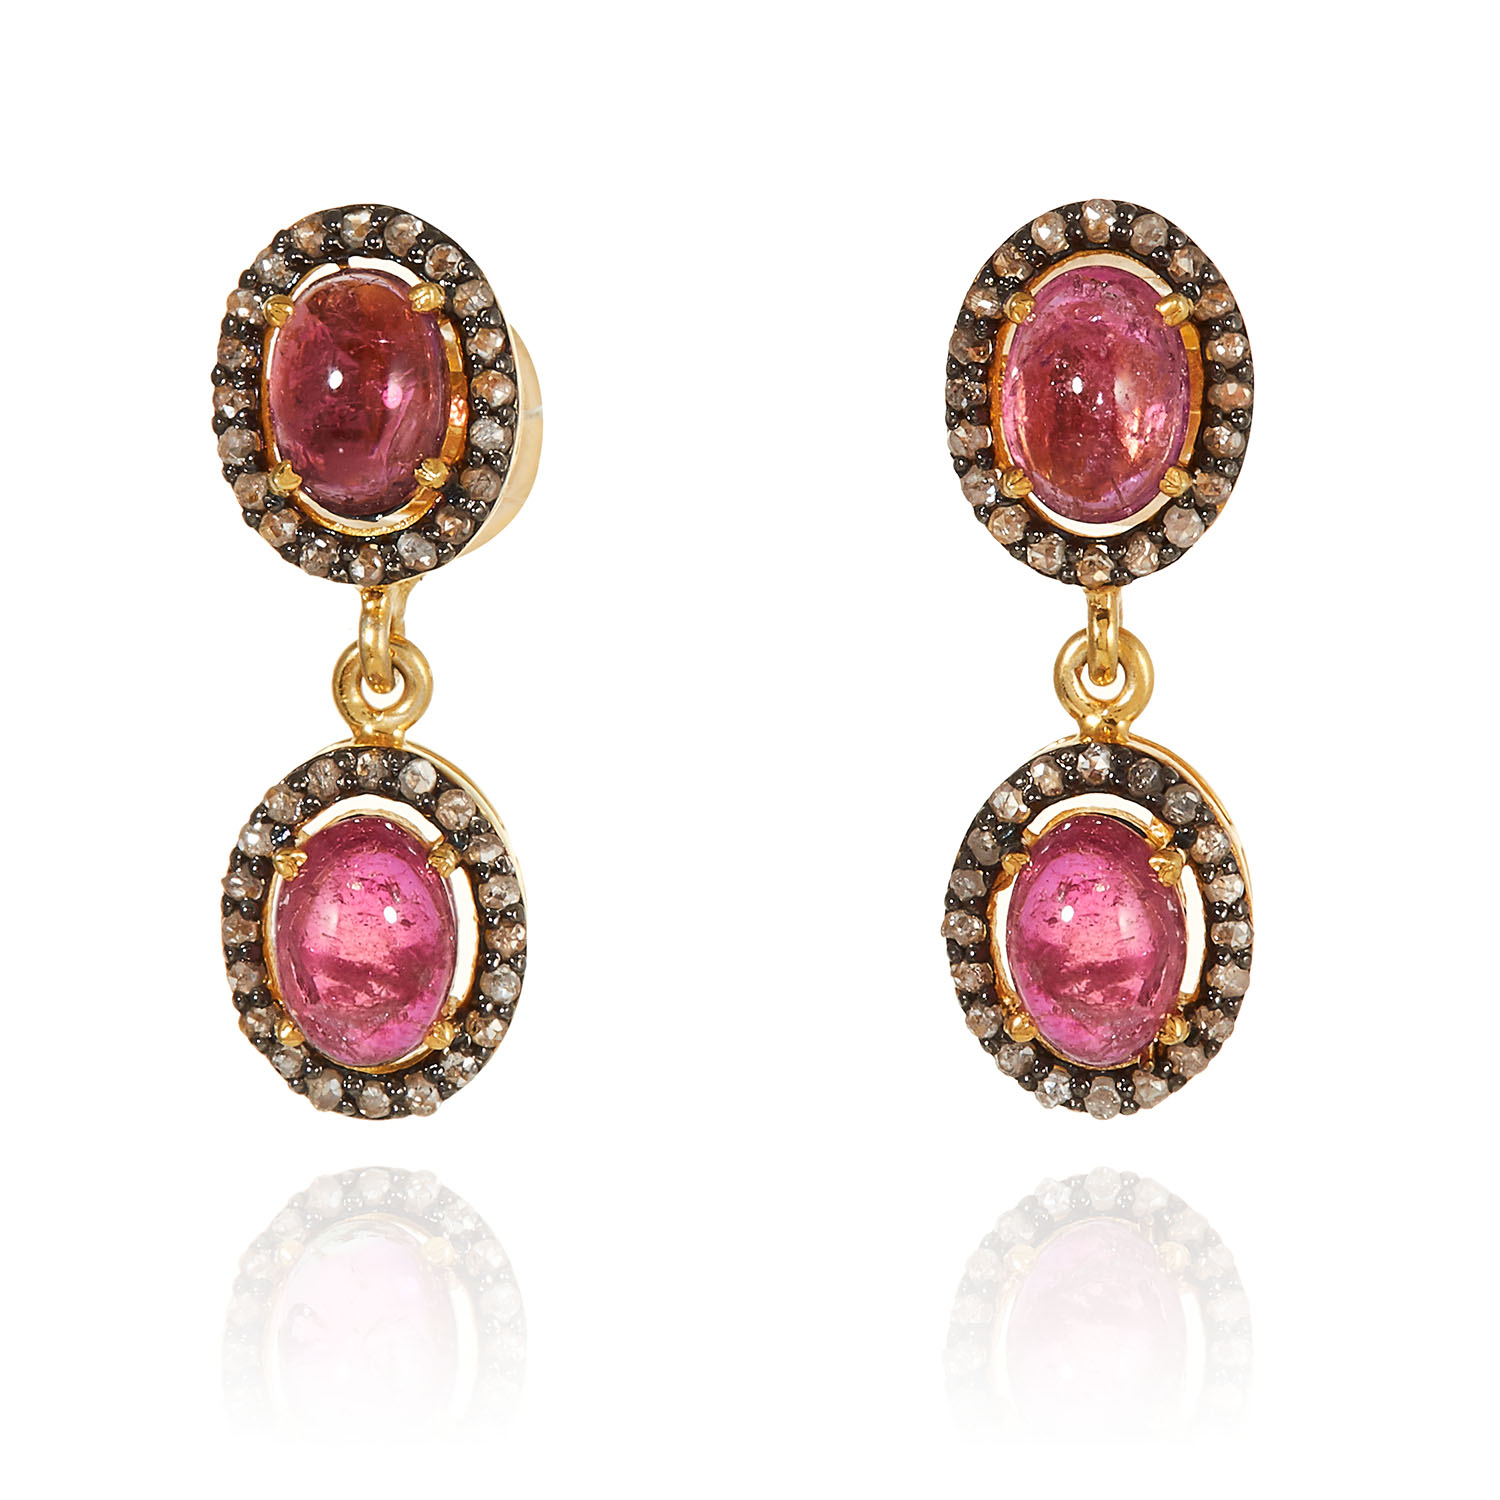 A PAIR OF TOURMALINE AND DIAMOND DROP EARRINGS in yellow gold, each set with two oval cabochon